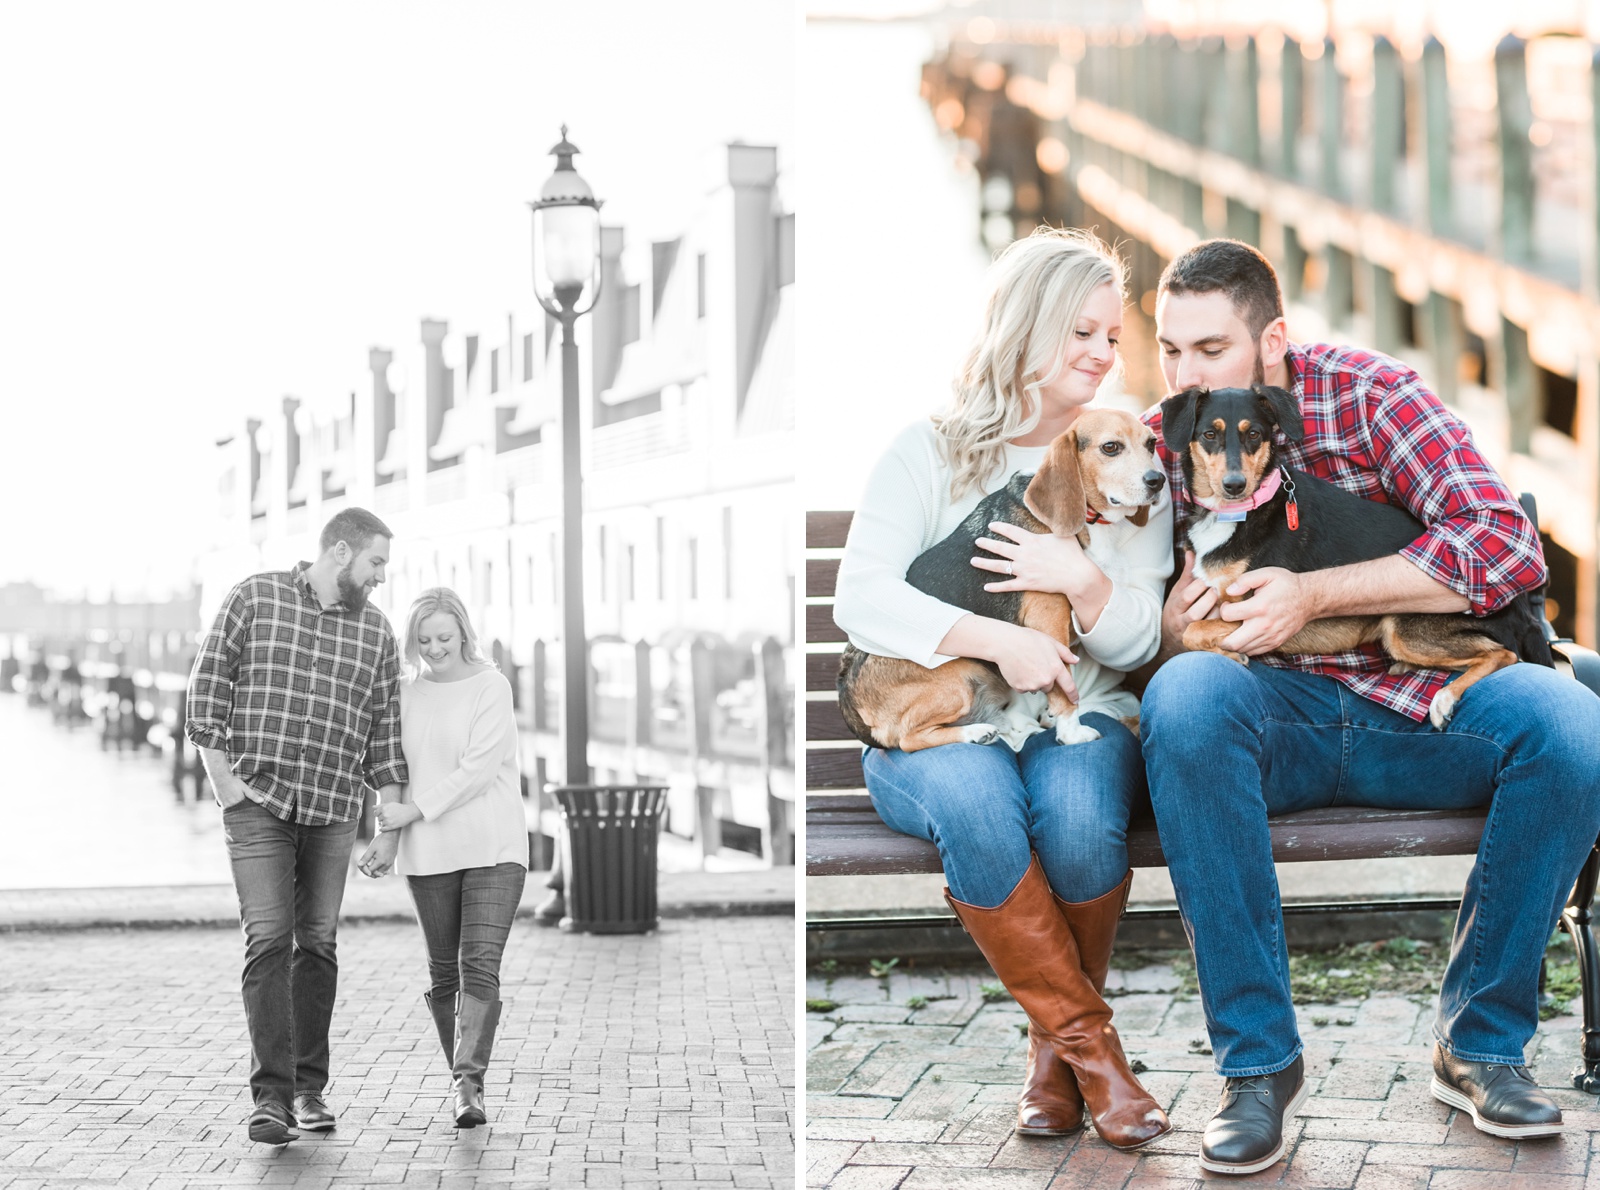 downtown-norfolk-virginia-fall-engagement-session-photo_2327.jpg